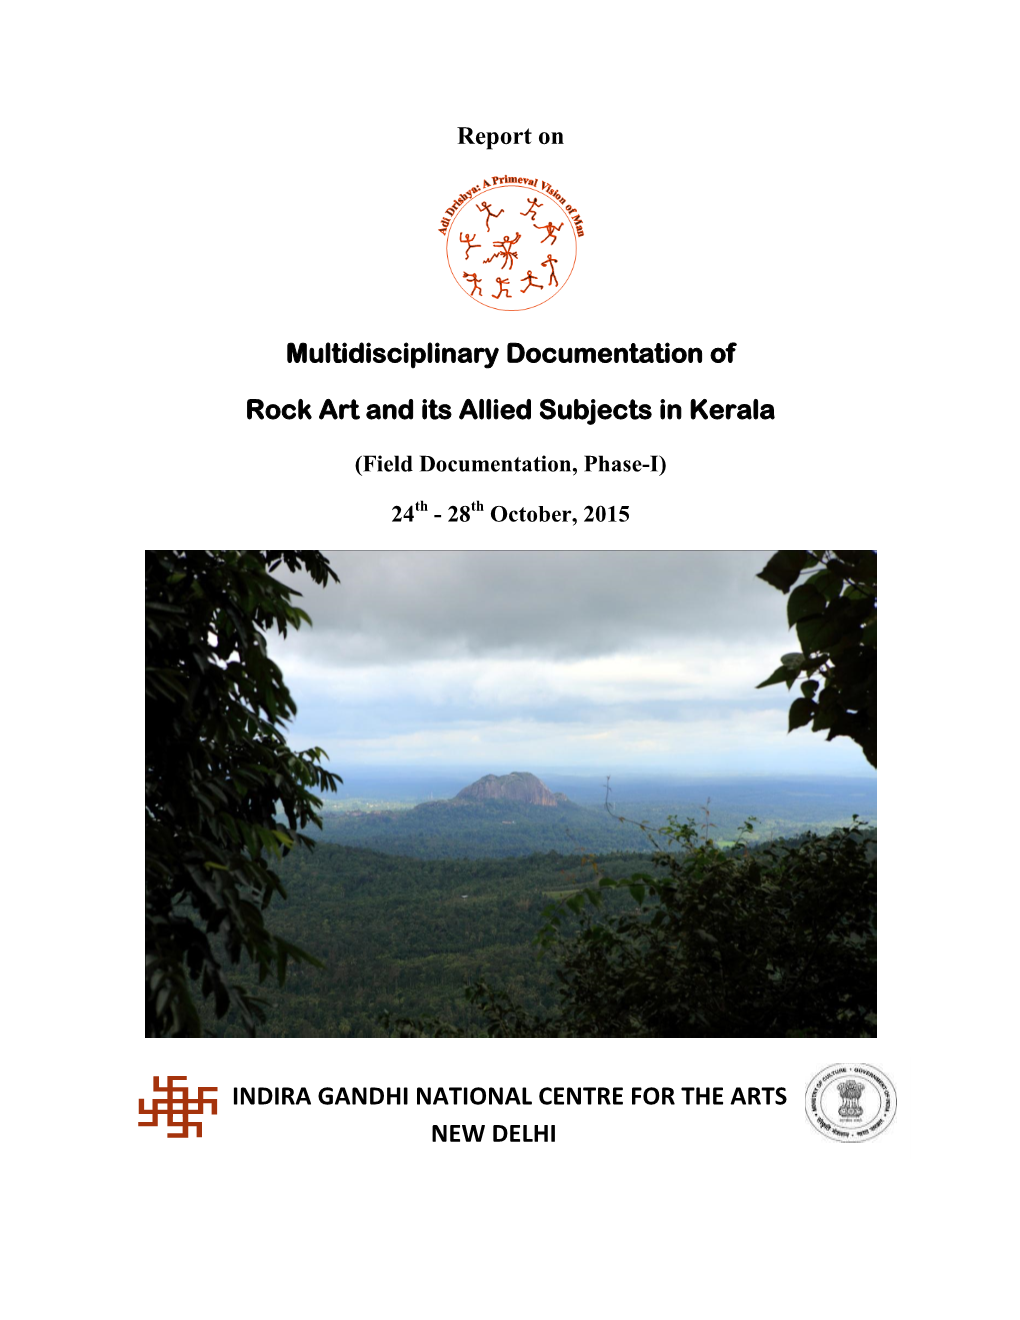 Multidisciplinary Documentation of Rock Art and Its Allied Subjects in Kerala’ Conducted from 24Th – 28Th October, 2015 at Wayanad District, Kerala